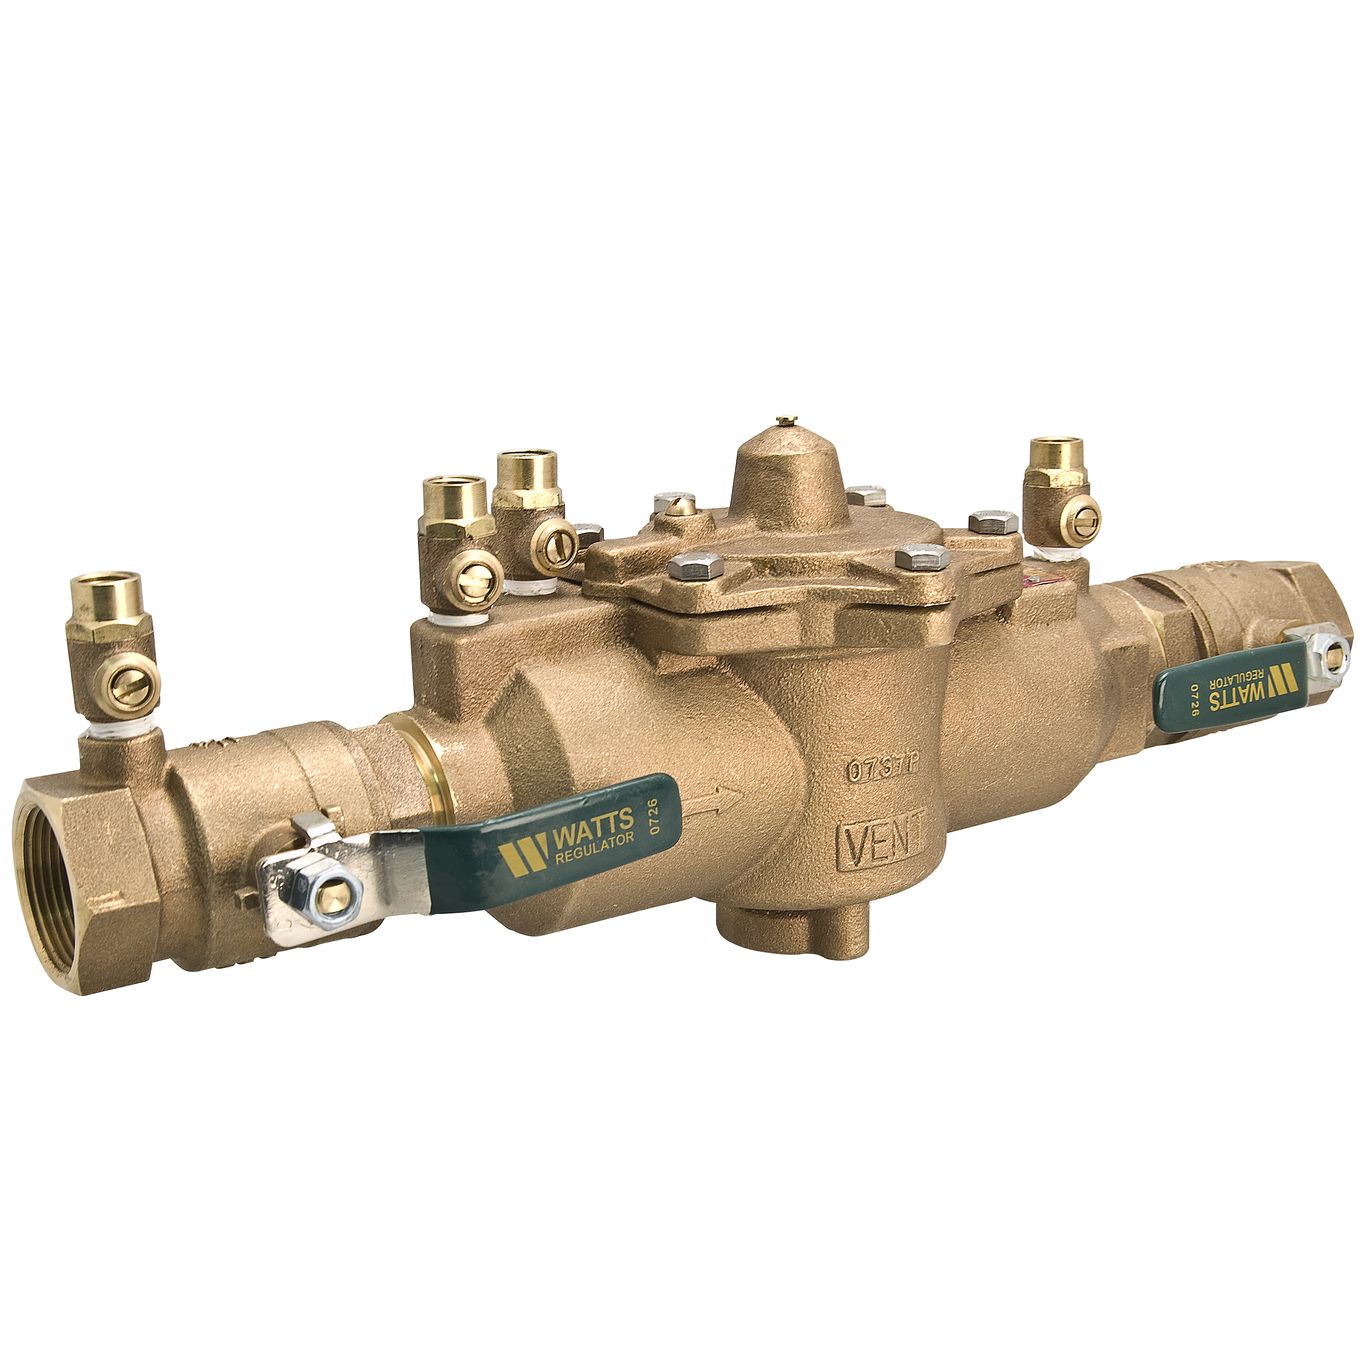 A backflow prevention device that can be installed by Dynamic Plumbing Works in Auckland